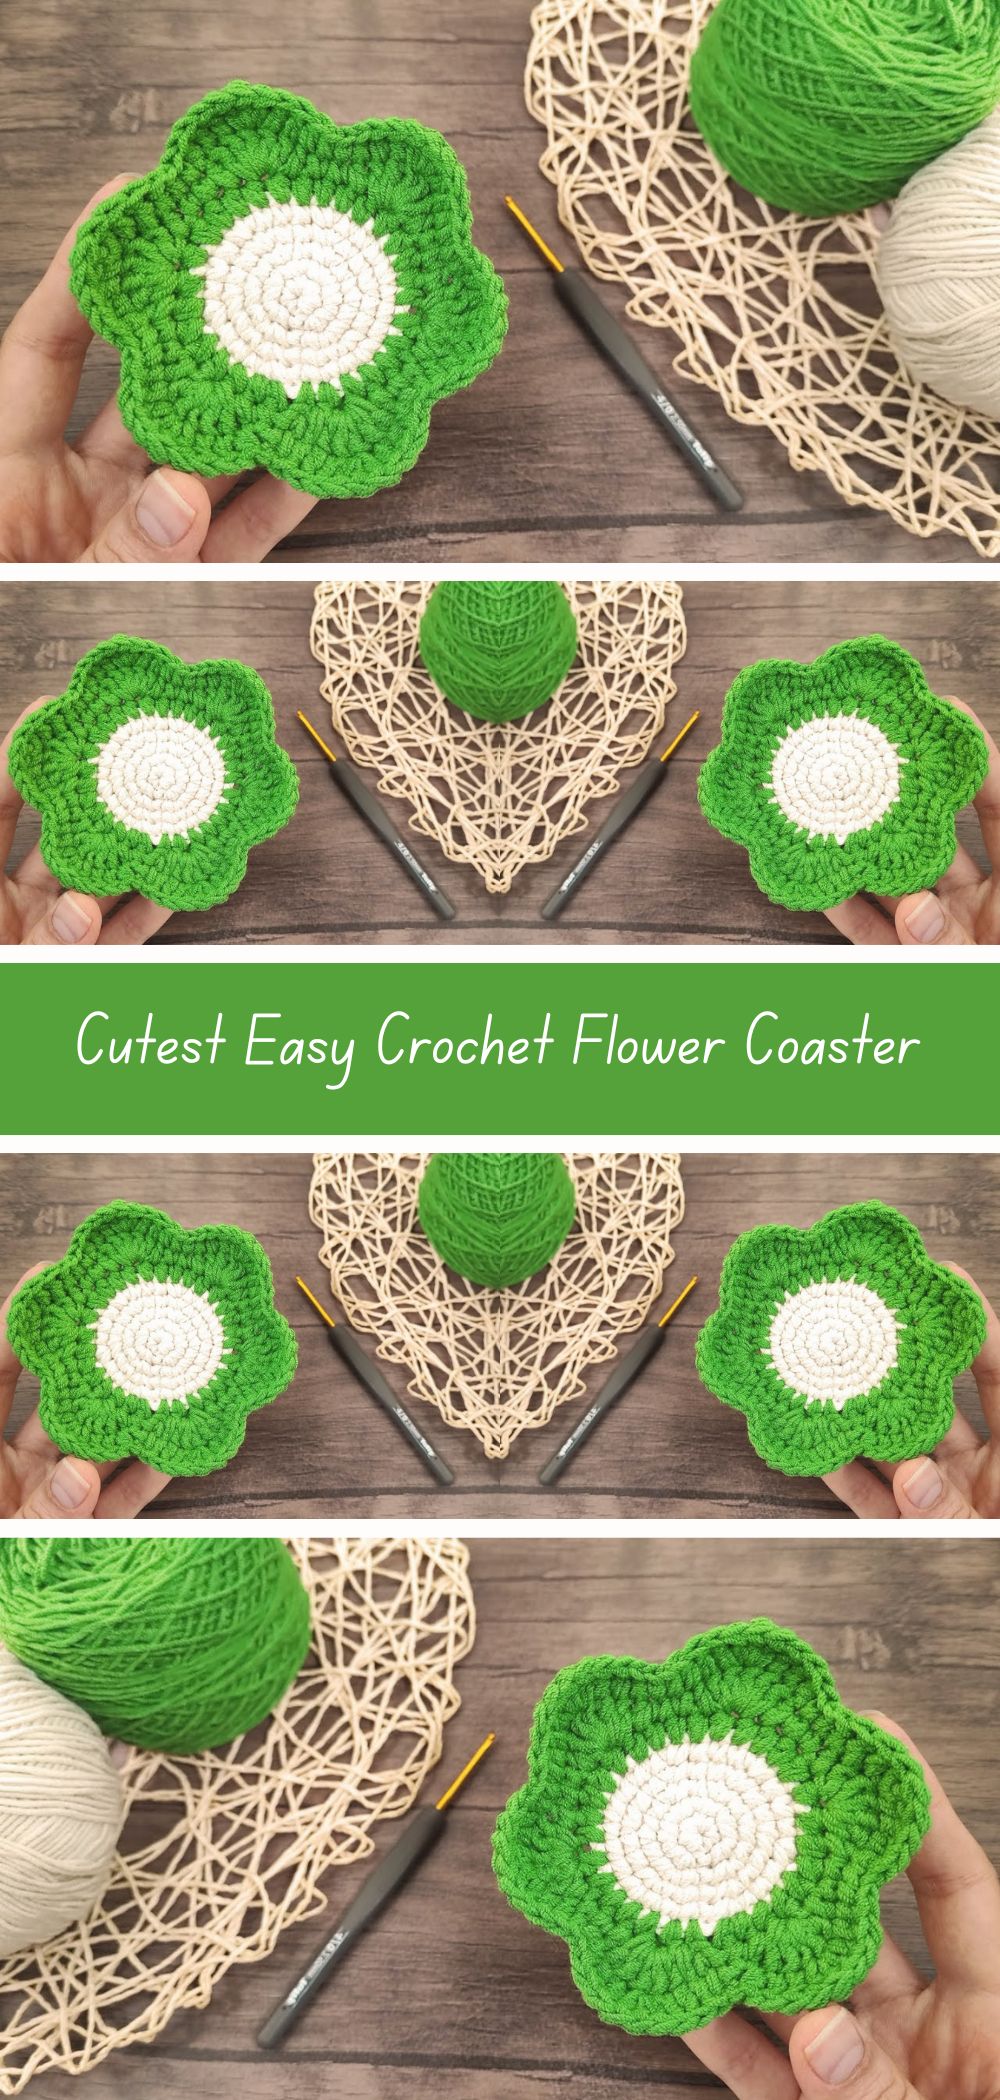 Cutest Easy Crochet Flower Coaster Free Pattern - Brighten up your table with adorable flower-shaped coasters using this free crochet pattern